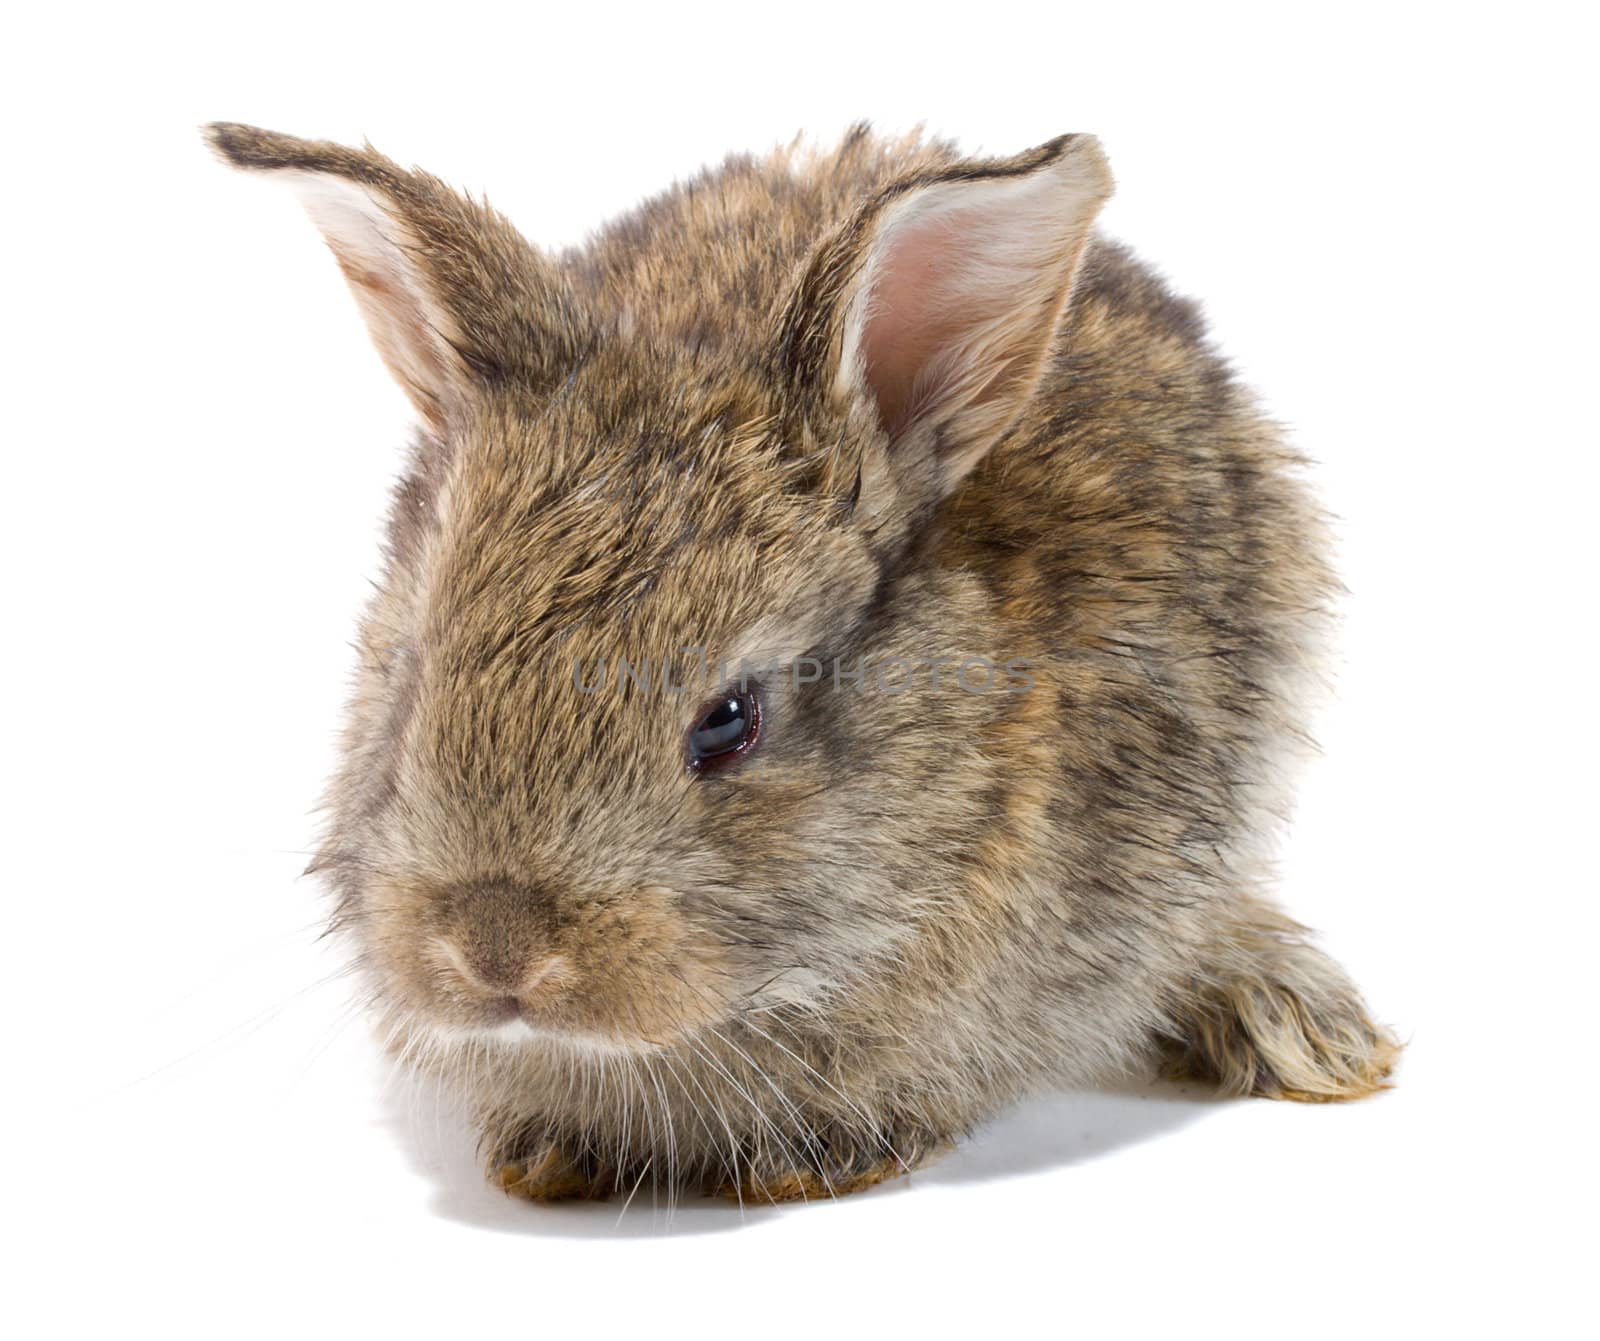 close-up small baby rabbit, isolated on white